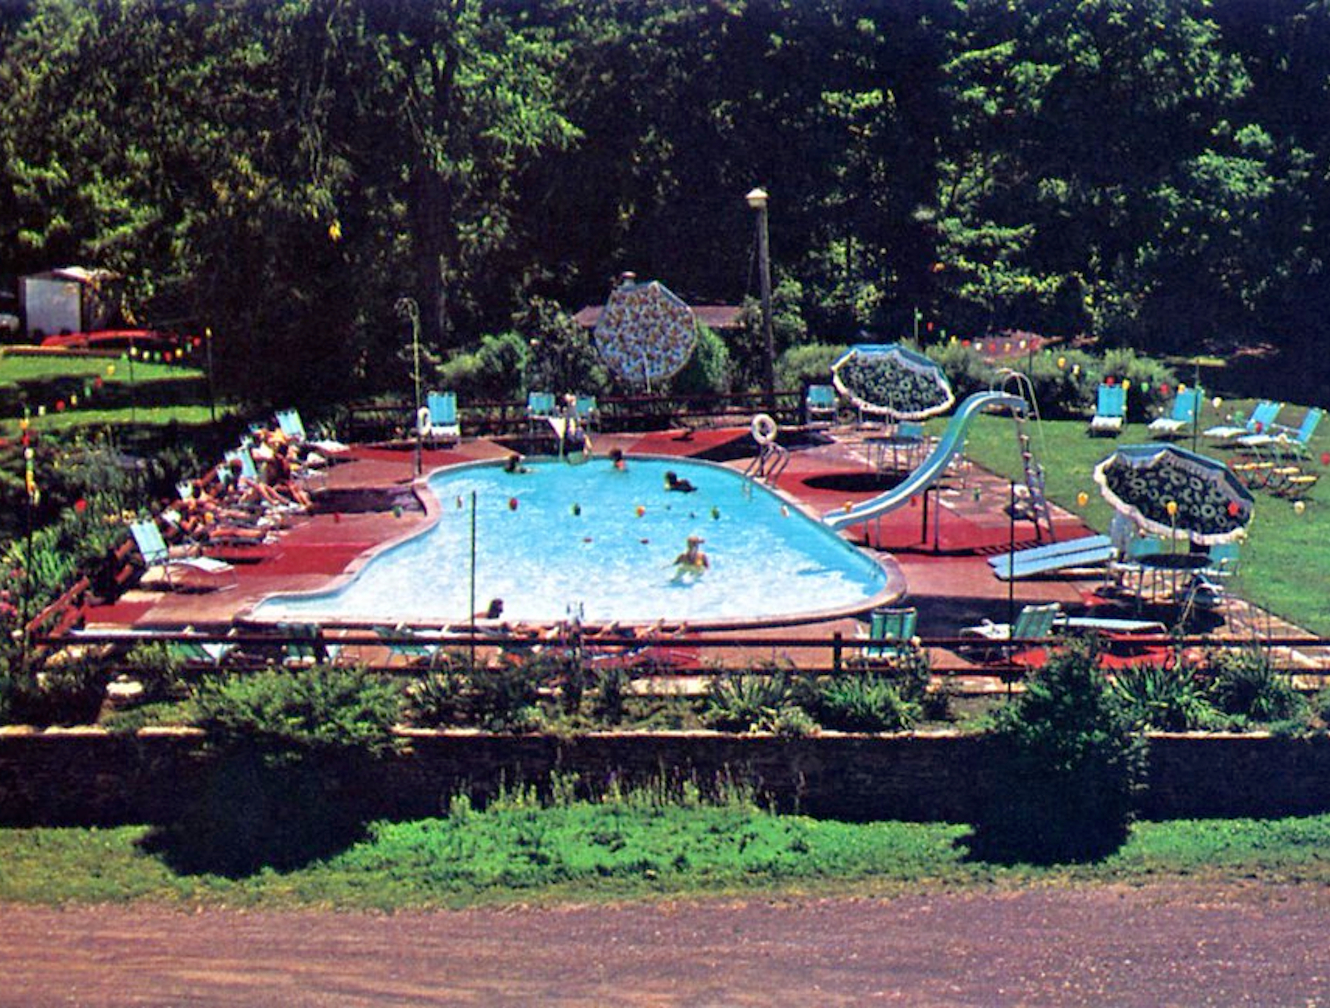 Historical picture of the Plum Point Lodge pool